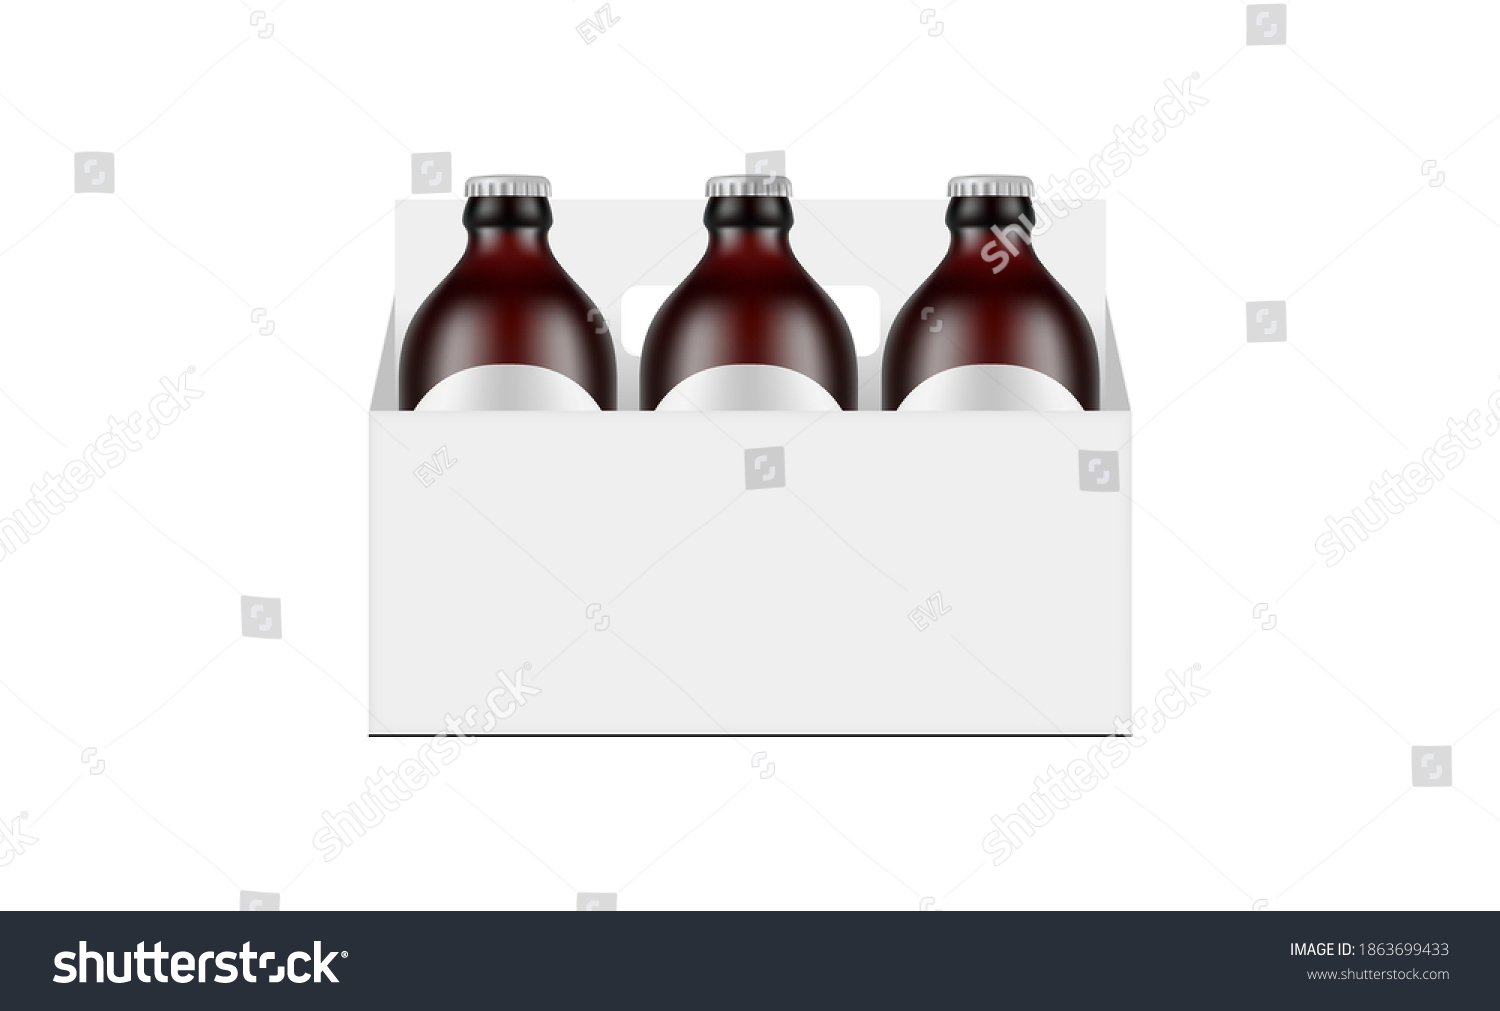 SVG of Paper Carrier Packaging Box Mockup With Dark Amber Glass Small Beer Bottles, Isolated on White Background. Vector Illustration svg